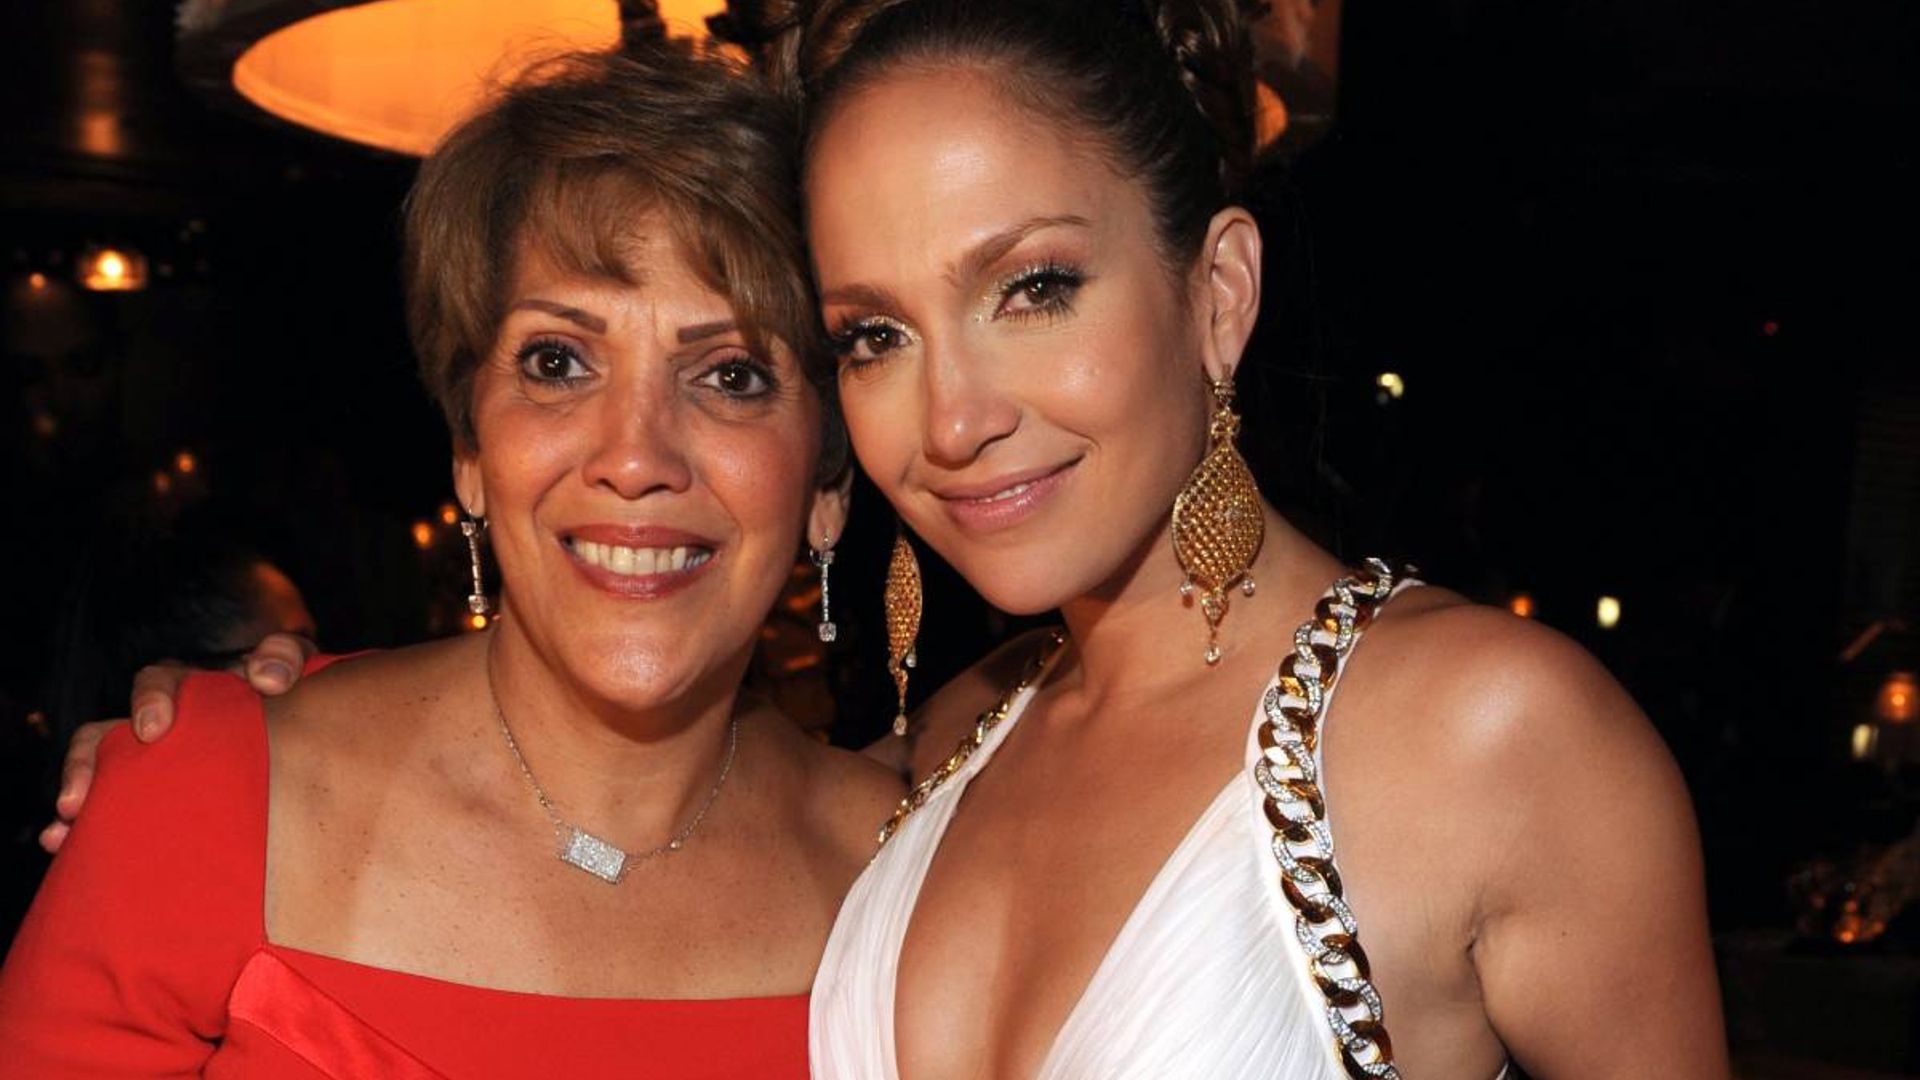 Jennifer Lopez's mother Guadalupe shows support for famous daughter in new photo